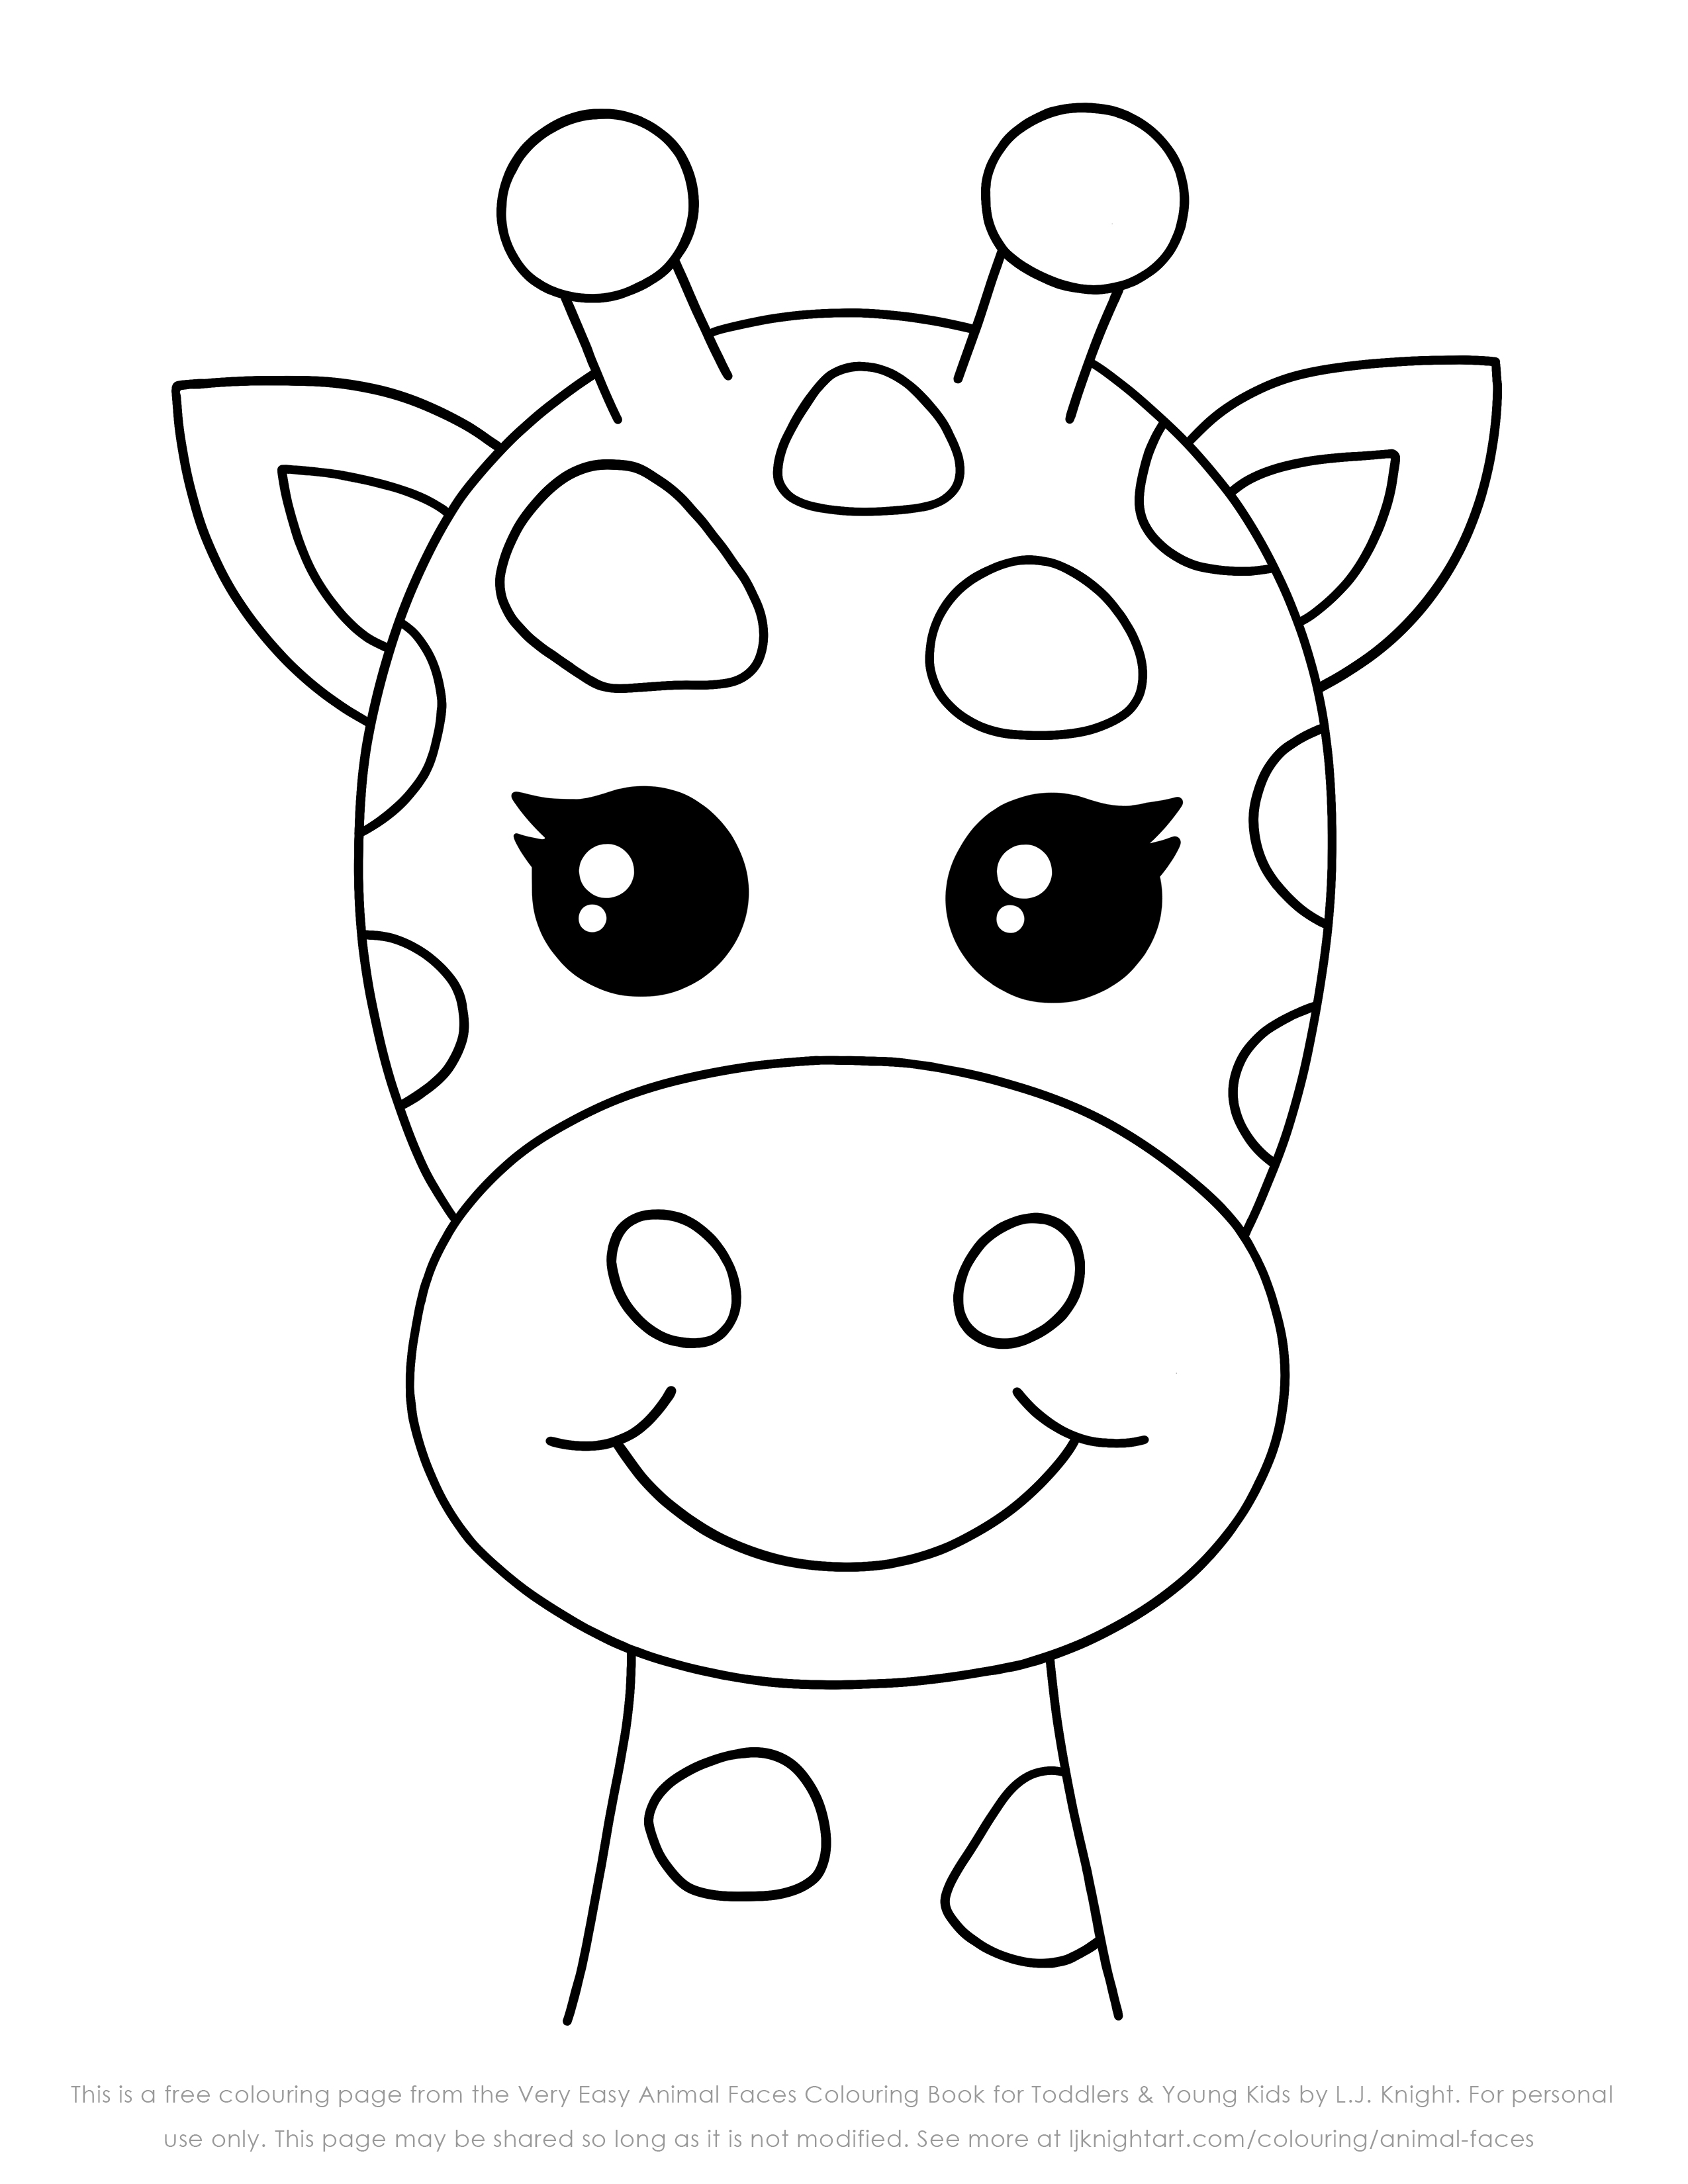 giraffe face coloring page